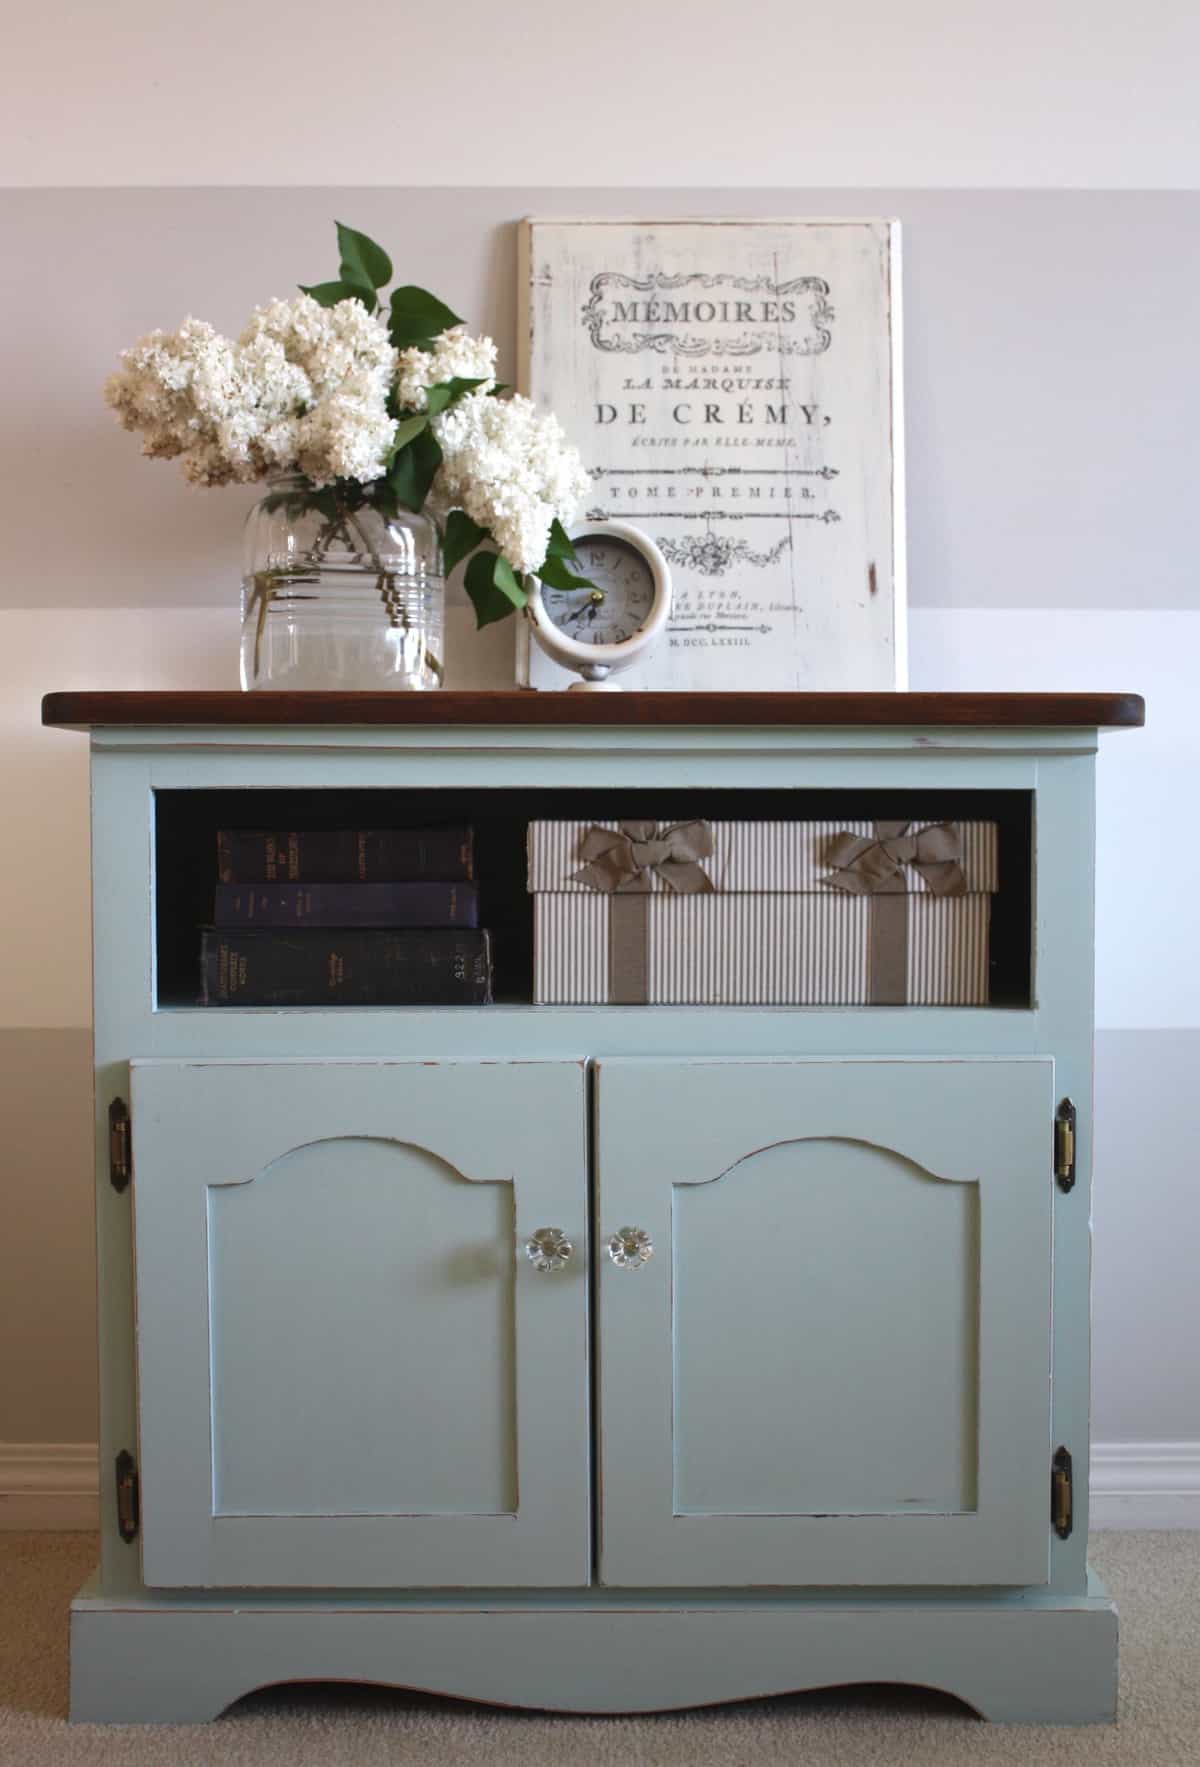 Get Ready for Happy Hour! #DIY #furniturepaint #paintedfurniture #homedecor #cabinet #storage #green #mint #chalkpaint #farmhouse #shabbychic #countrychicpaint - blog.countrychicpaint.com